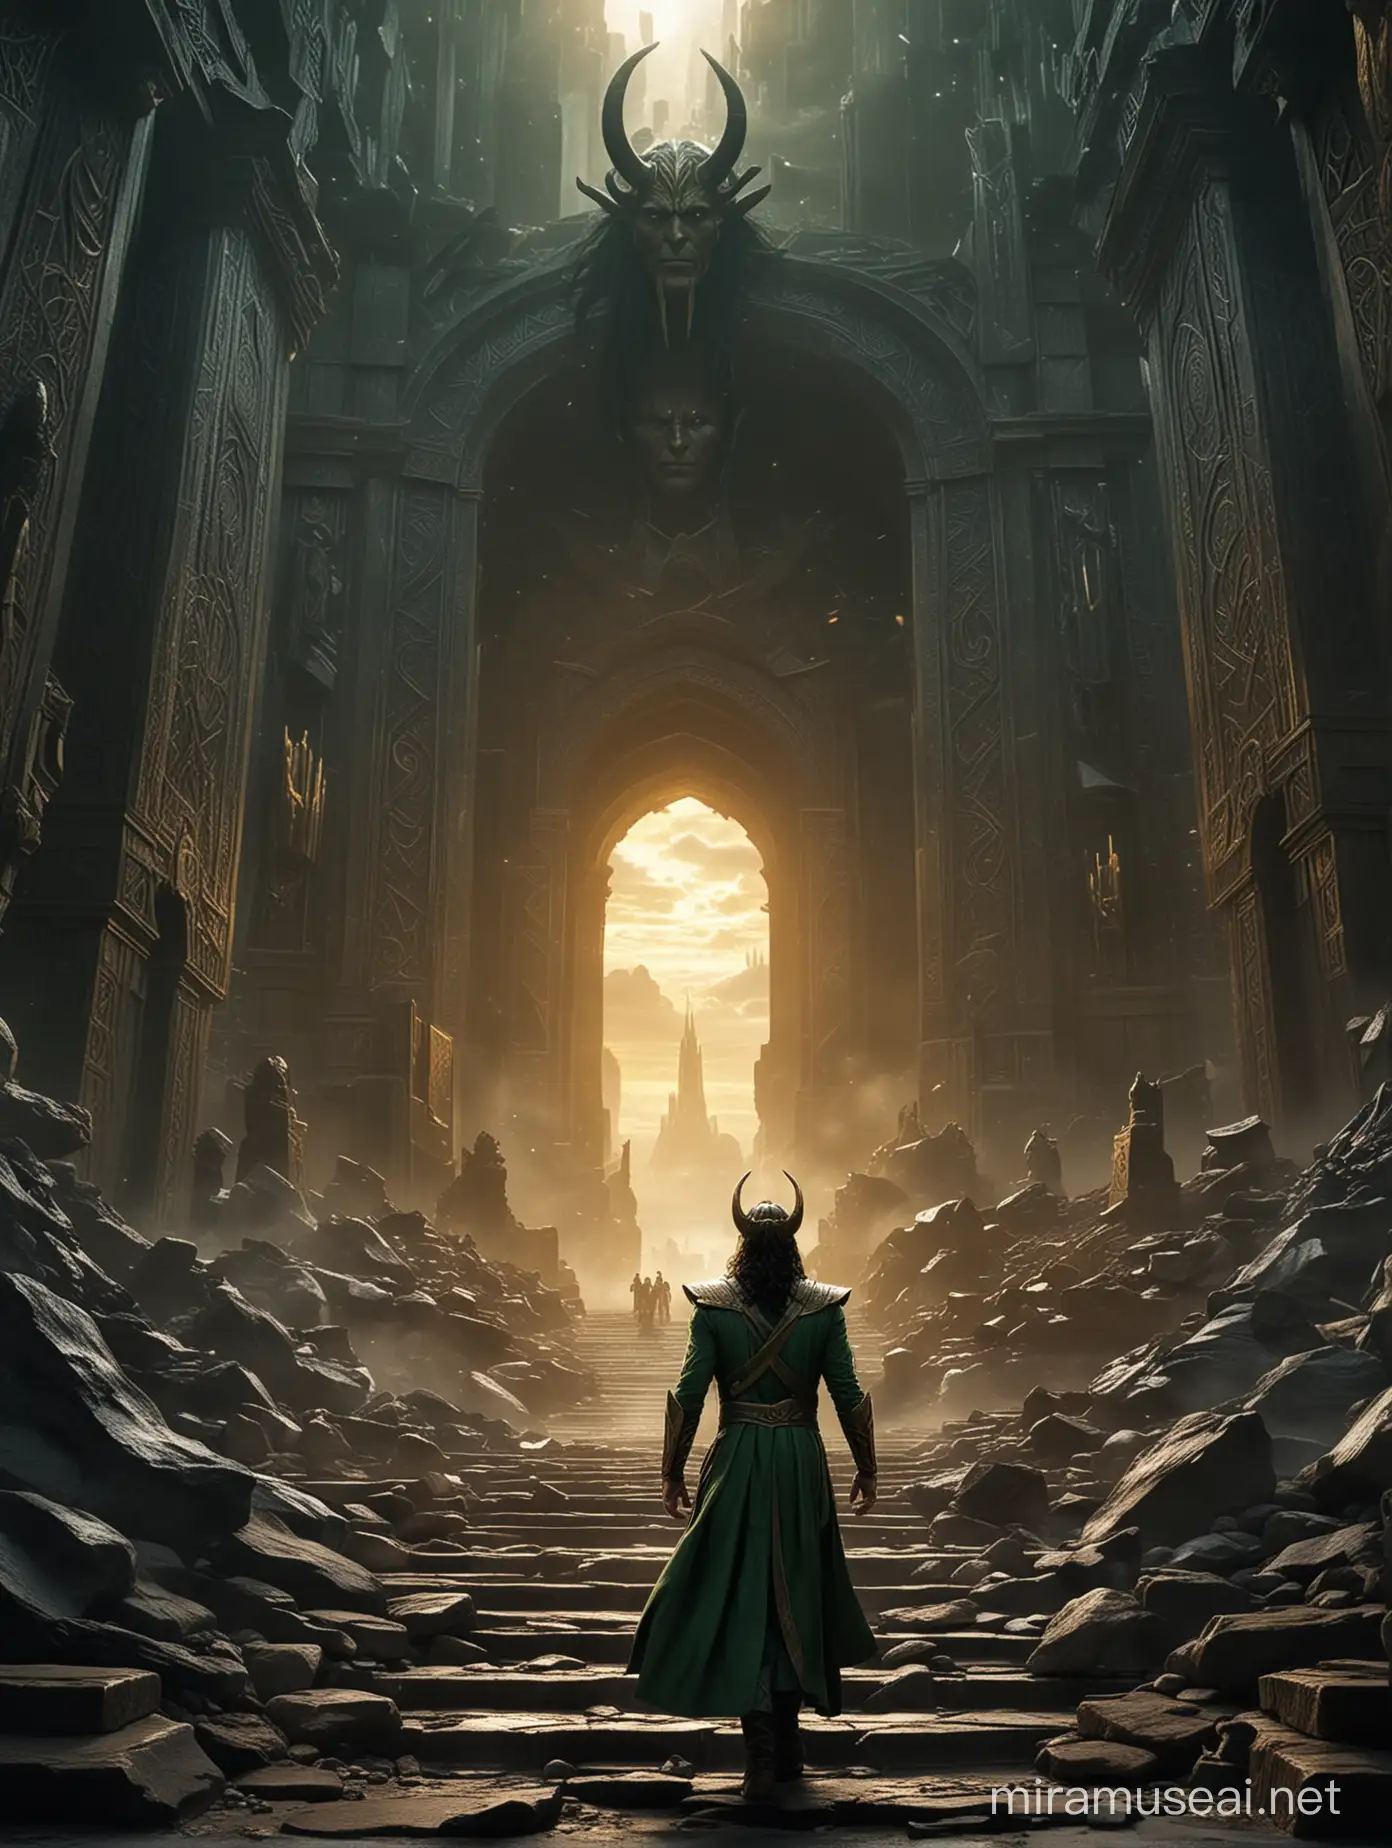 

As the spacecraft landed with a resounding thud on the majestic realm of Asgard, the ramp descended, revealing the enigmatic figure of Loki, clad in regal attire befitting his status as the God of Mischief. With cinematic grandeur, the backdrop of Asgard's breathtaking landscapes framed his entrance, enhancing the dramatic effect of his arrival.

Stepping onto the hallowed ground of his homeland, Loki's gaze swept across the towering spires and golden hues of the celestial city, his expression a mix of defiance and intrigue. The intricate detailing of Asgard's architecture served as a stunning contrast to Loki's dark silhouette, emphasizing the complexities of his character and his tumultuous relationship with his kin.

As the camera panned around him, capturing every subtle movement and expression, it became evident that Loki's return heralded a new chapter in the saga of Asgard. With the promise of intrigue and betrayal lingering in the air, his presence added a layer of tension to the already tumultuous dynamics of the realm.

Thus, amidst the breathtaking beauty of Asgard's cinematic backdrop, Loki stood poised to embark on his next adventure, his every move a mesmerizing dance between deception and redemption.